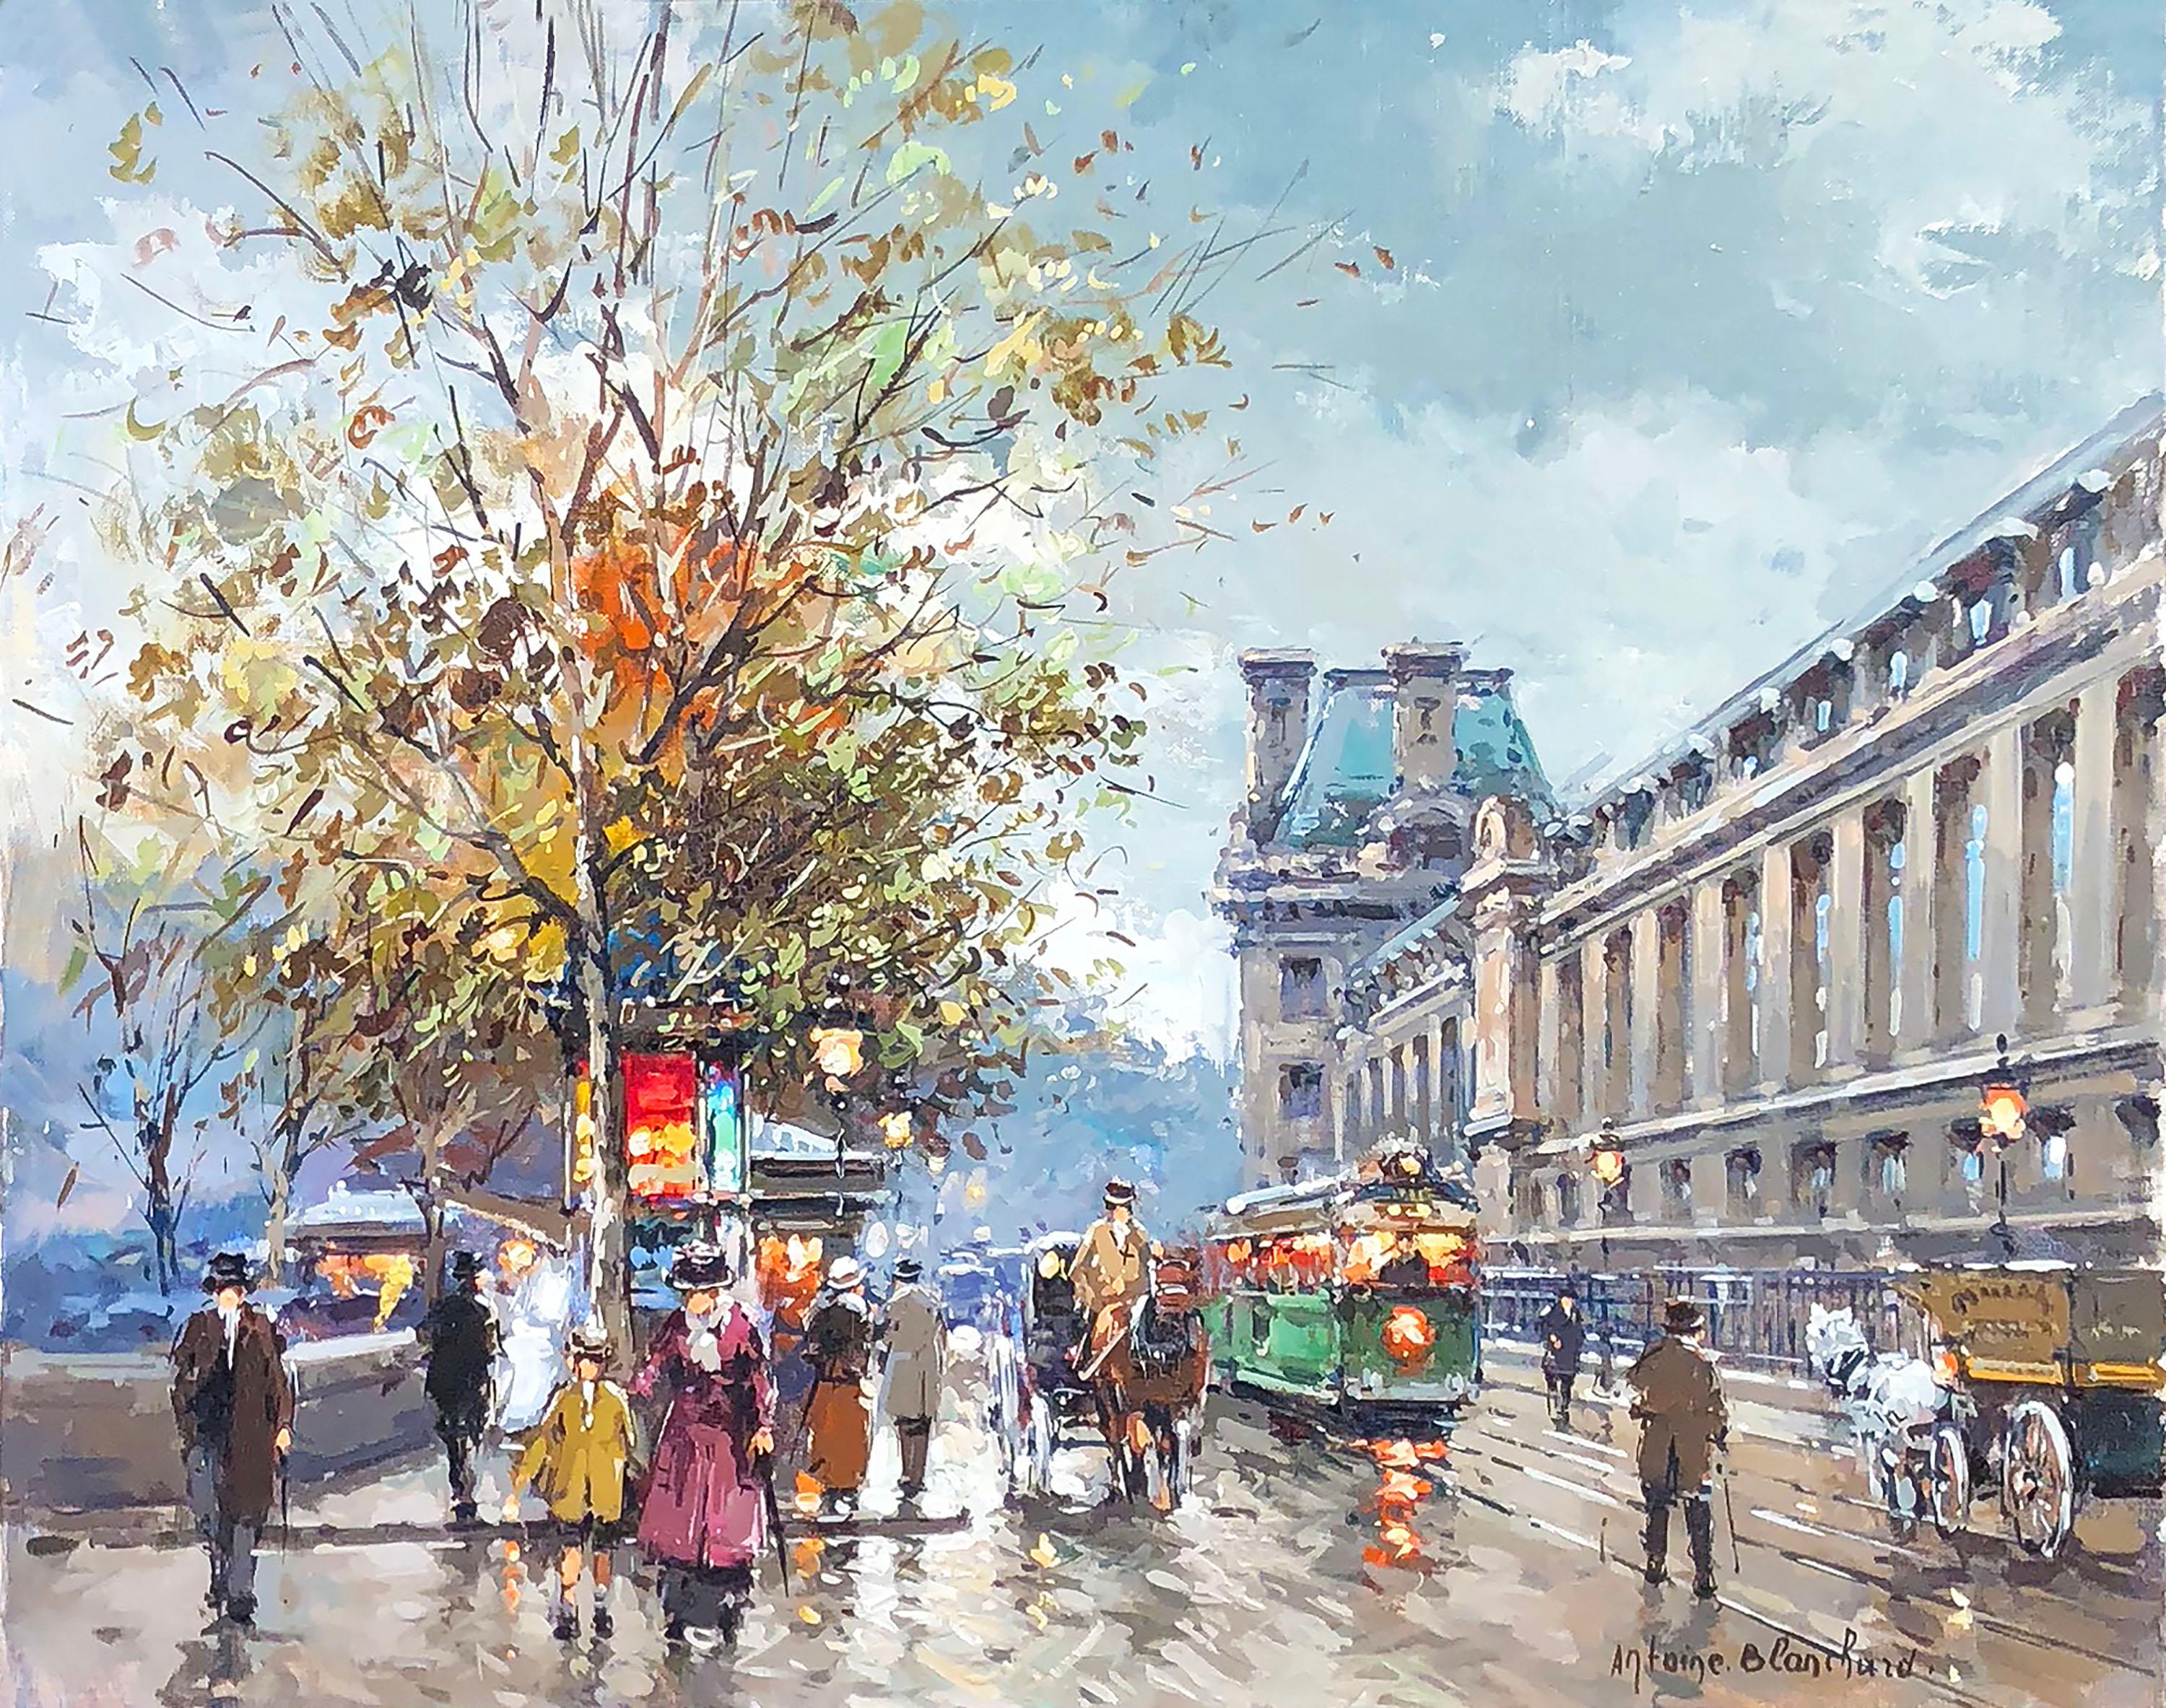 Along the Louvre - Painting by Antoine Blanchard